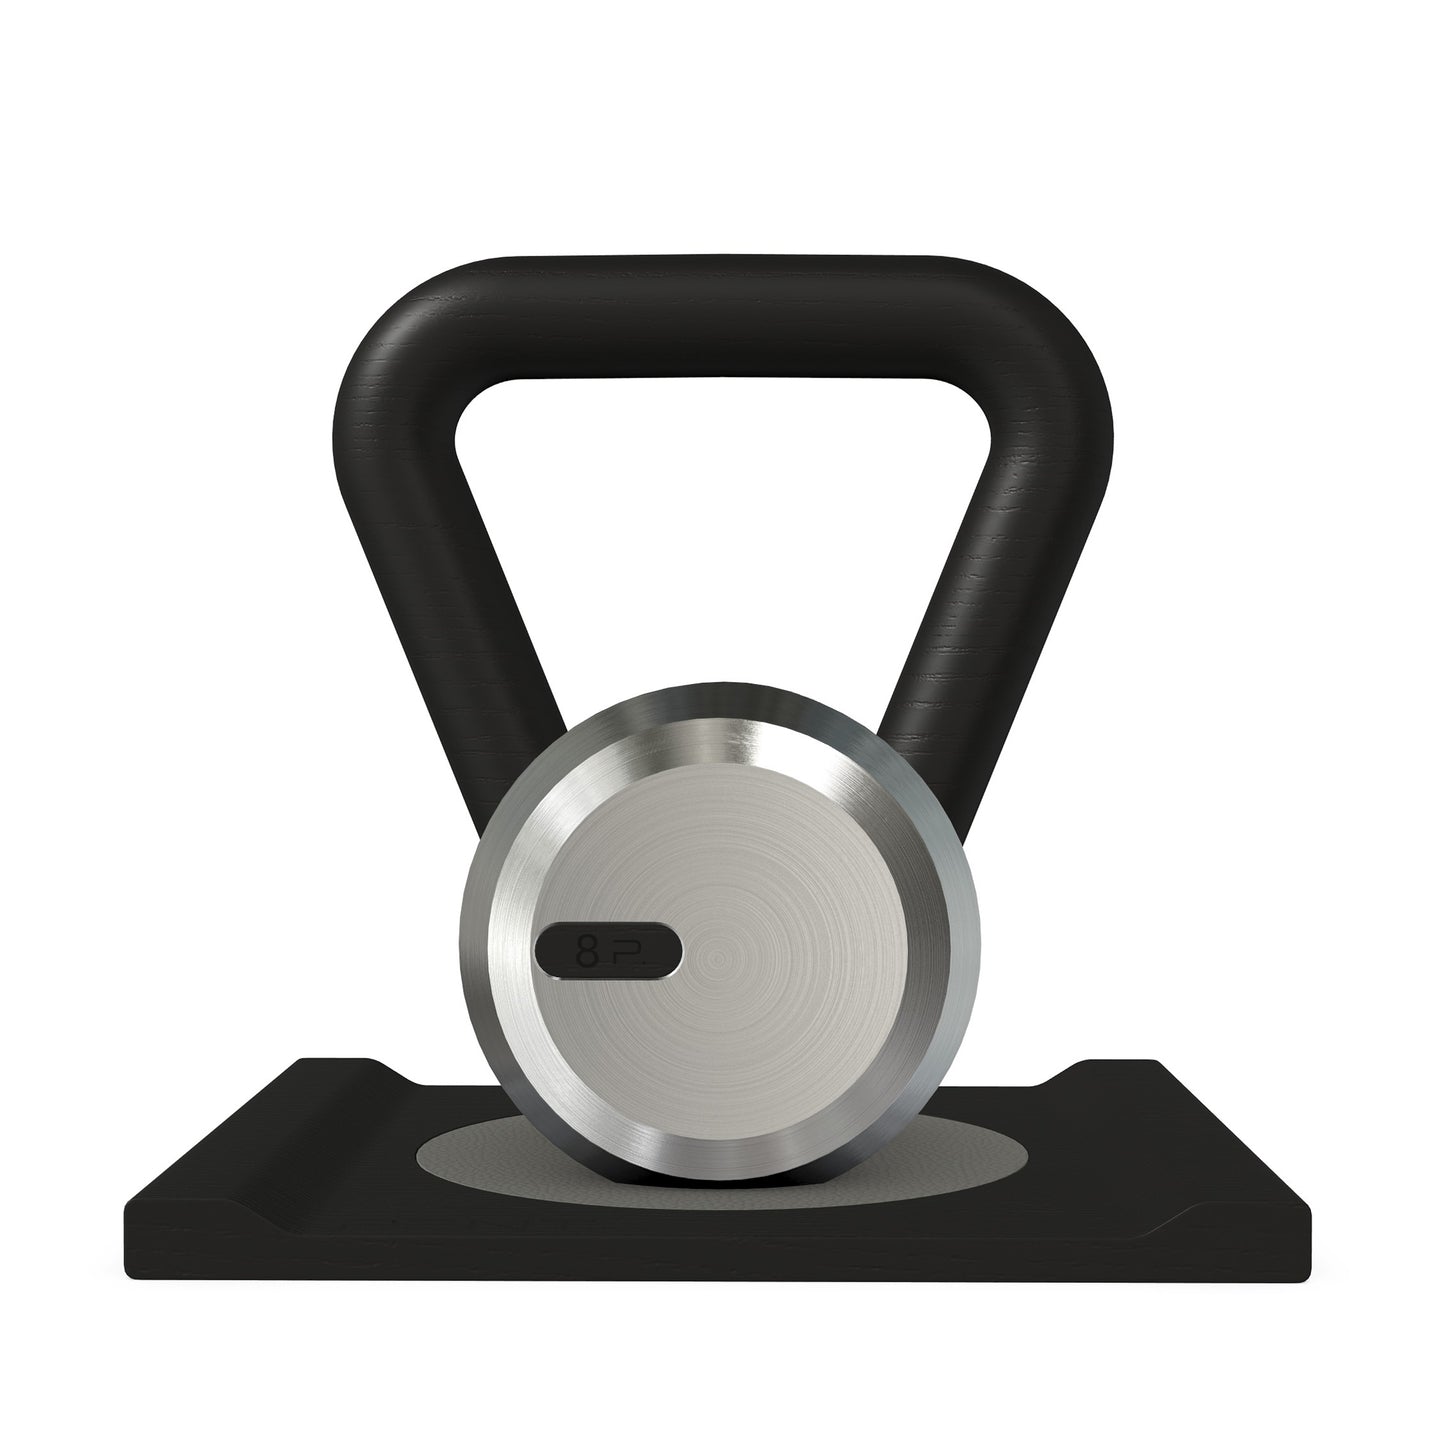 LOVA - Luxury Kettlebell with Wooden Stand